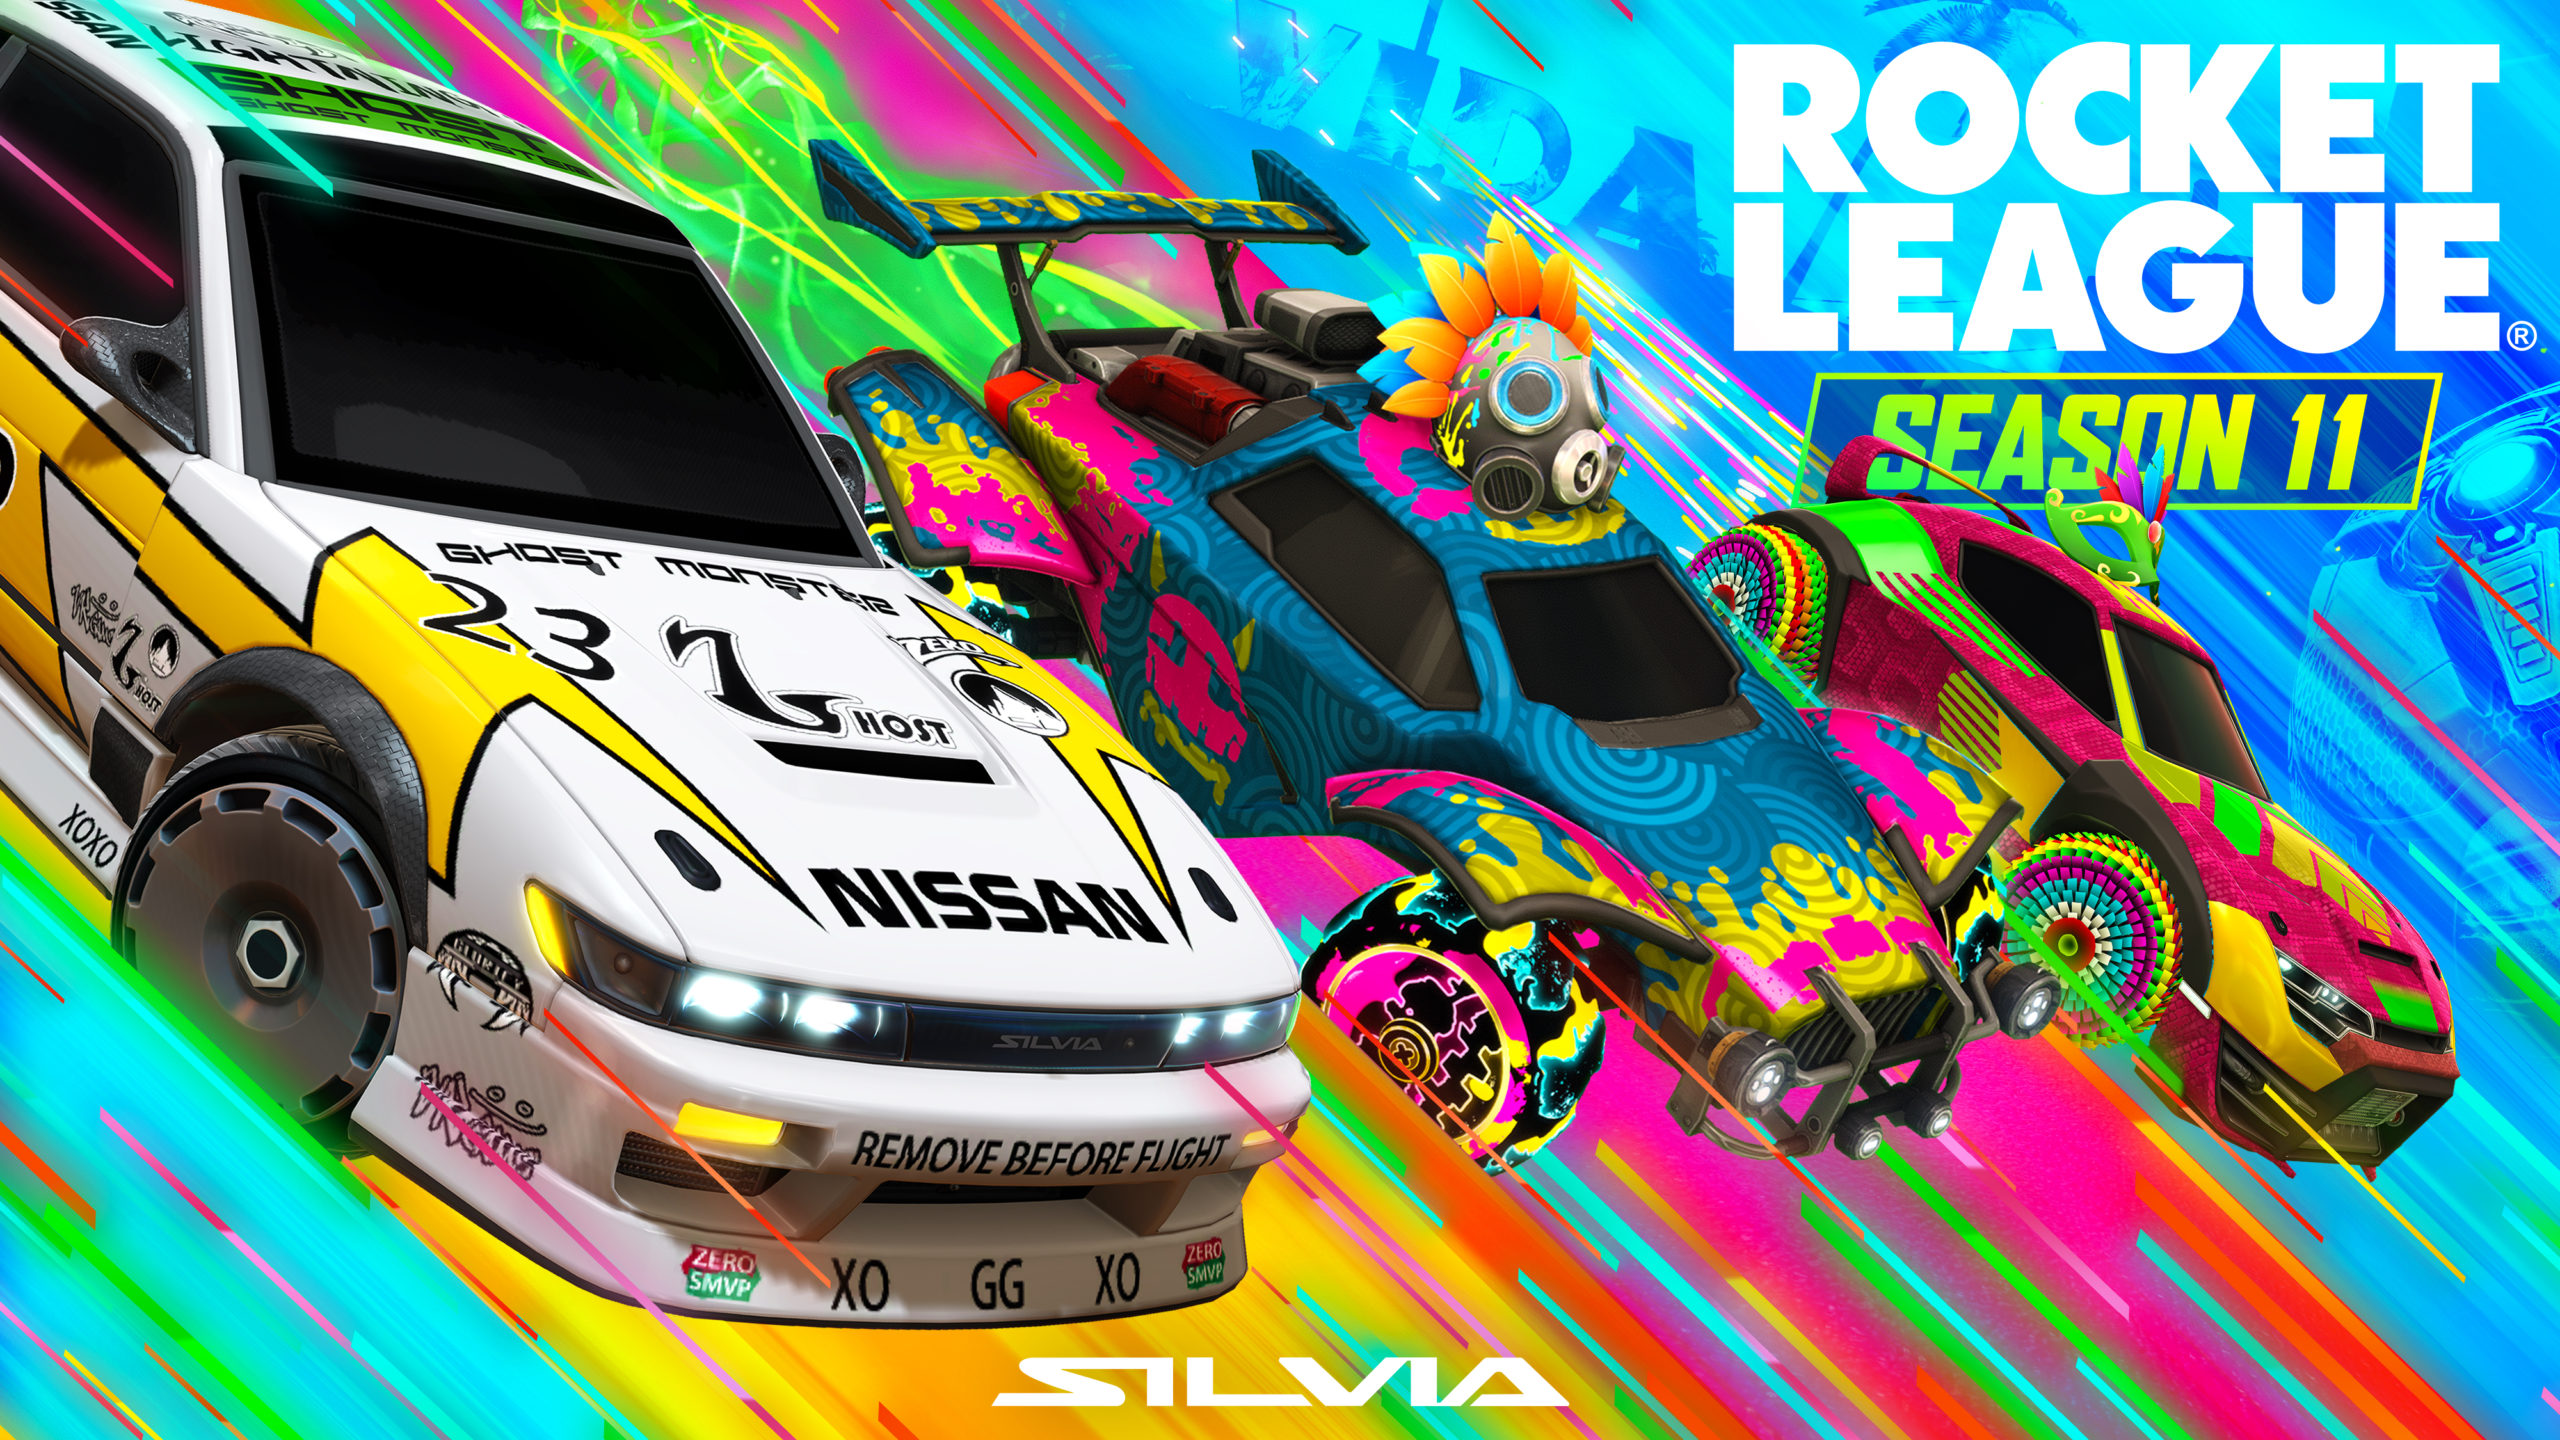 Nissan Silvia And New Arena Join Rocket League Season 11 On 8 June